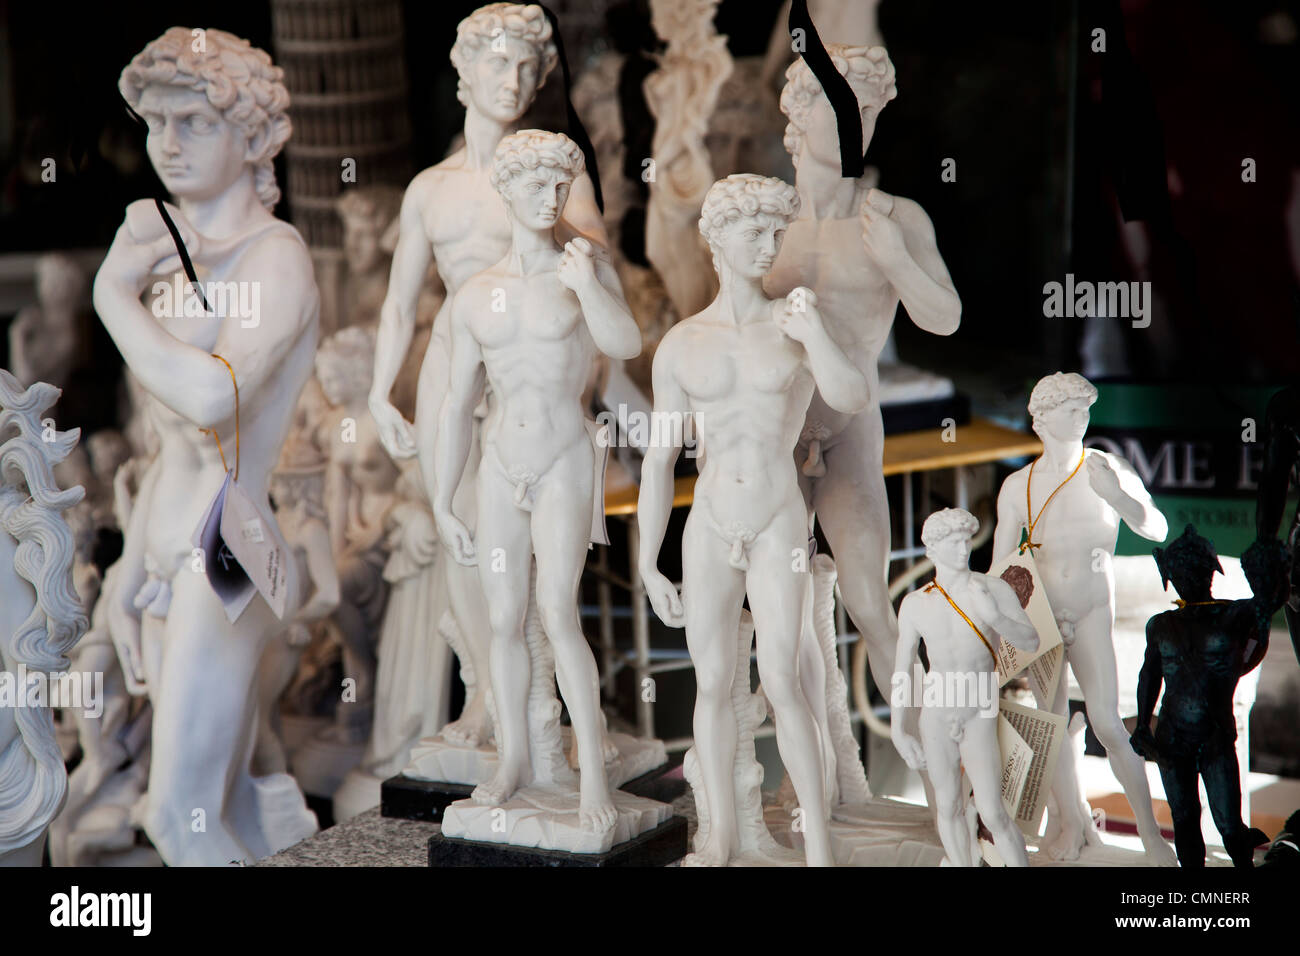 Statuettes of David by Michaelangello on sale in a tourist stall in Florence, Italy. Stock Photo